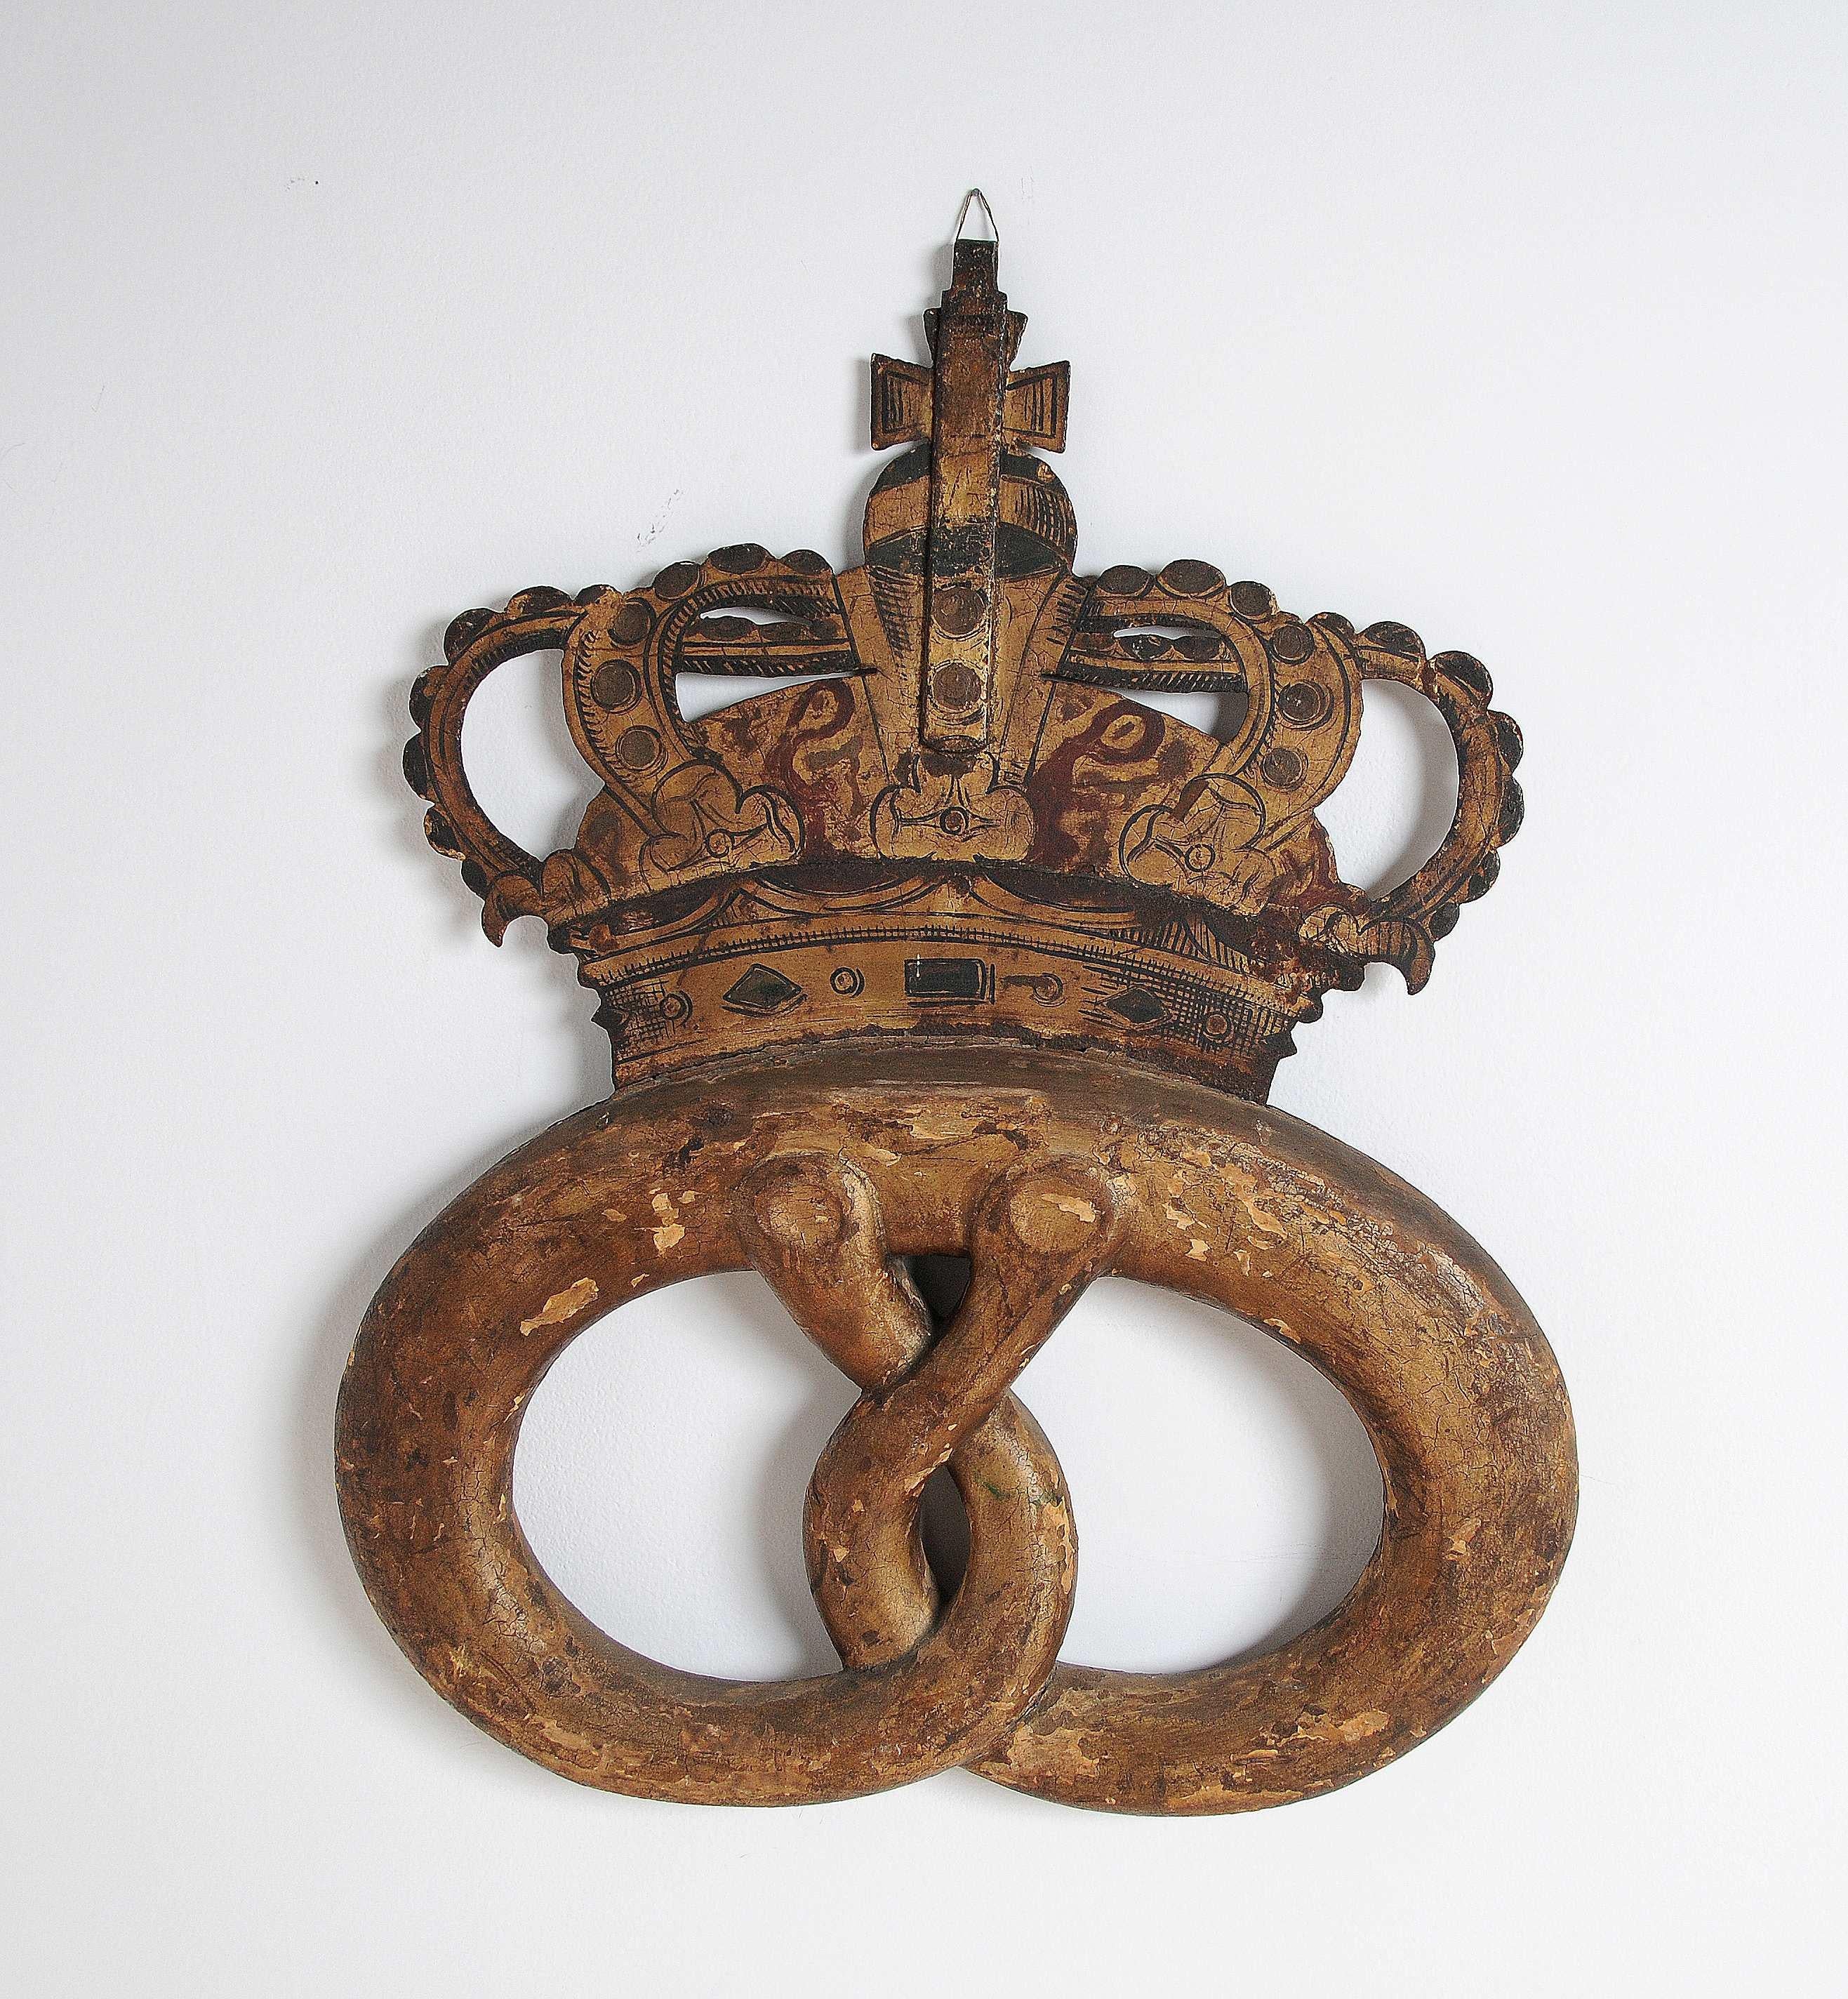 Gorgeous Rococo 18th century Danish Baker's Sign with Kringle and crown, origin: Denmark, circa 1760 - 1780, all original gilt wood and paint.  

When Copenhagen was occupied in 1658 / 1659, the Bakers succeeded in delivering bread to the population